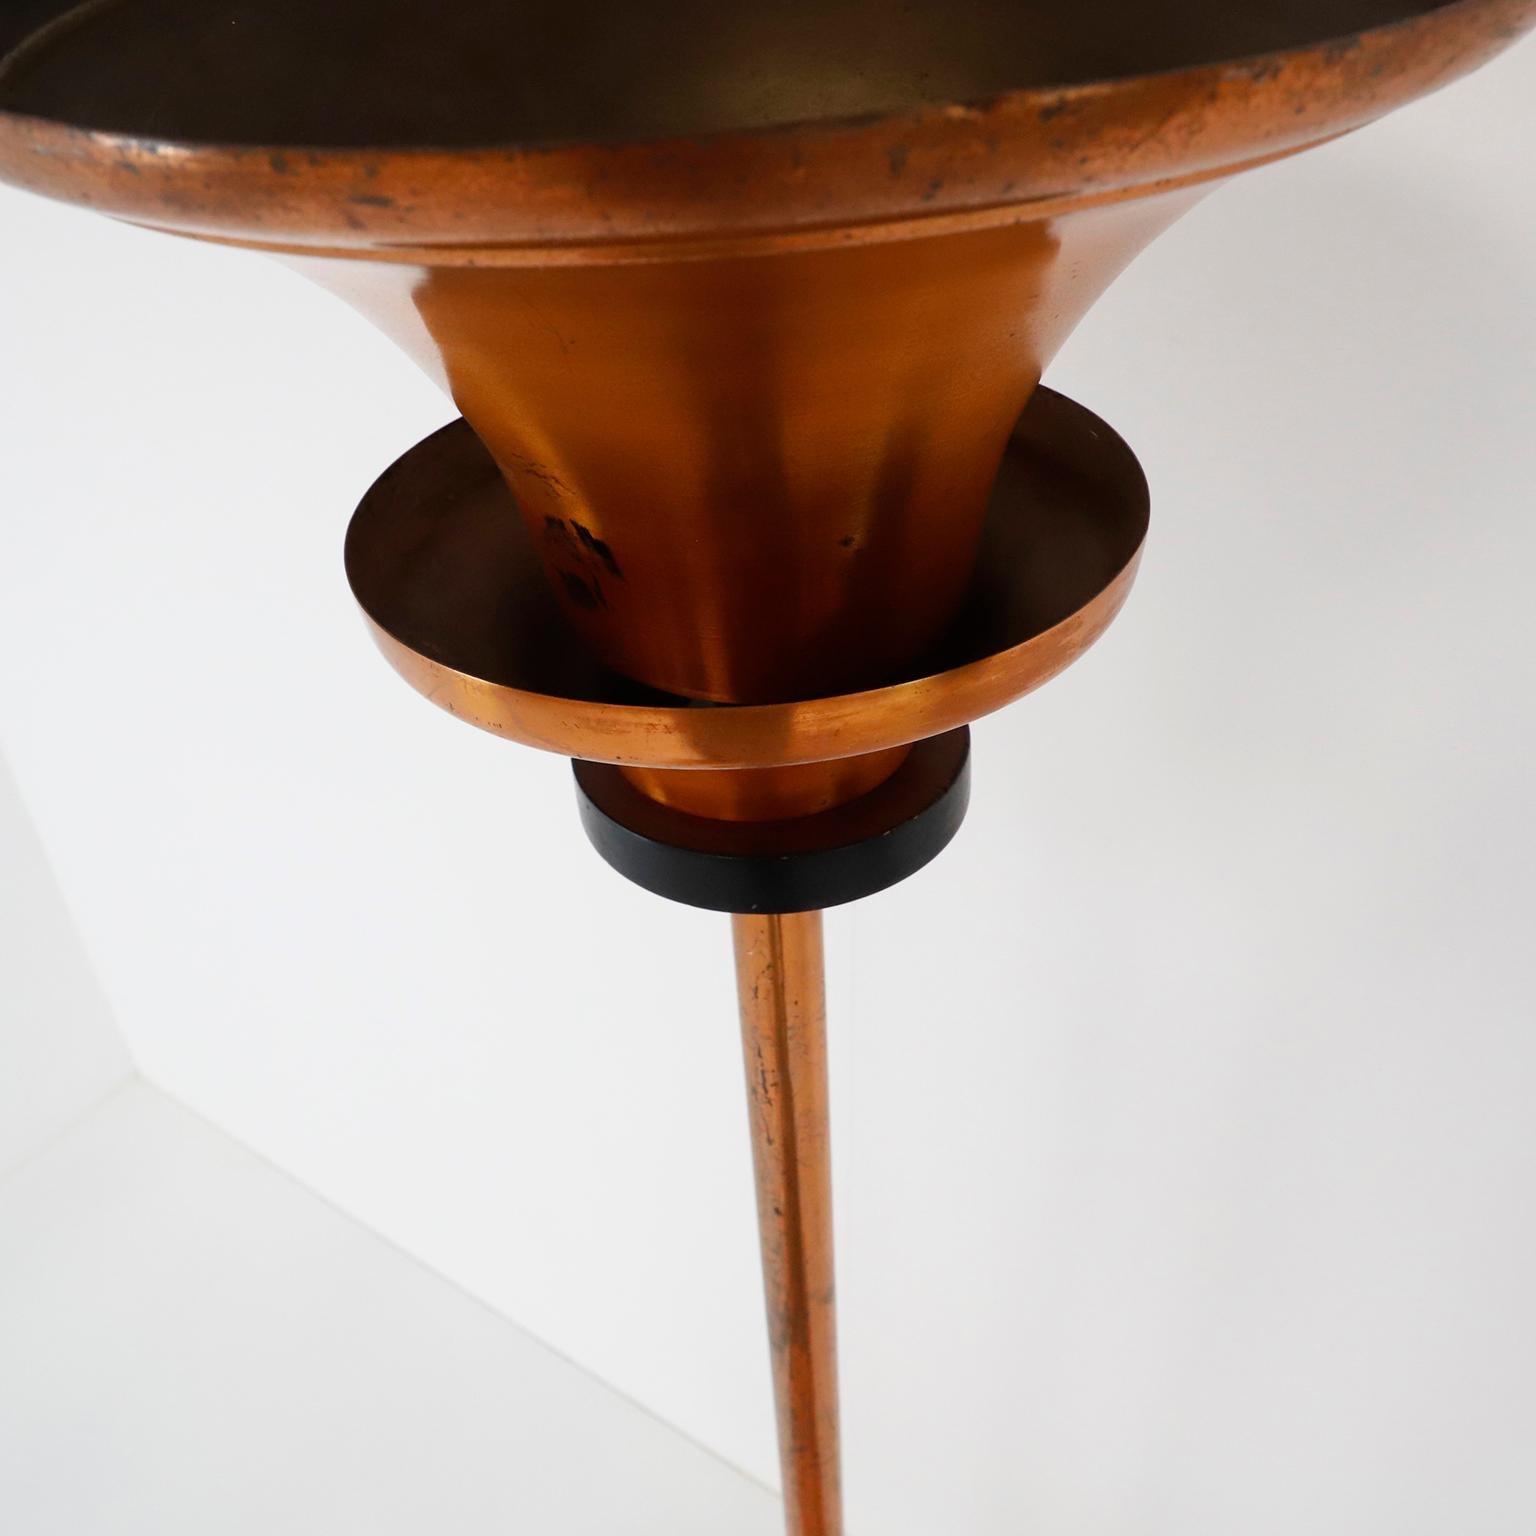 American Art Deco Torchiere Floor Lamp Made in Cooper and Wood Details, 1920s For Sale